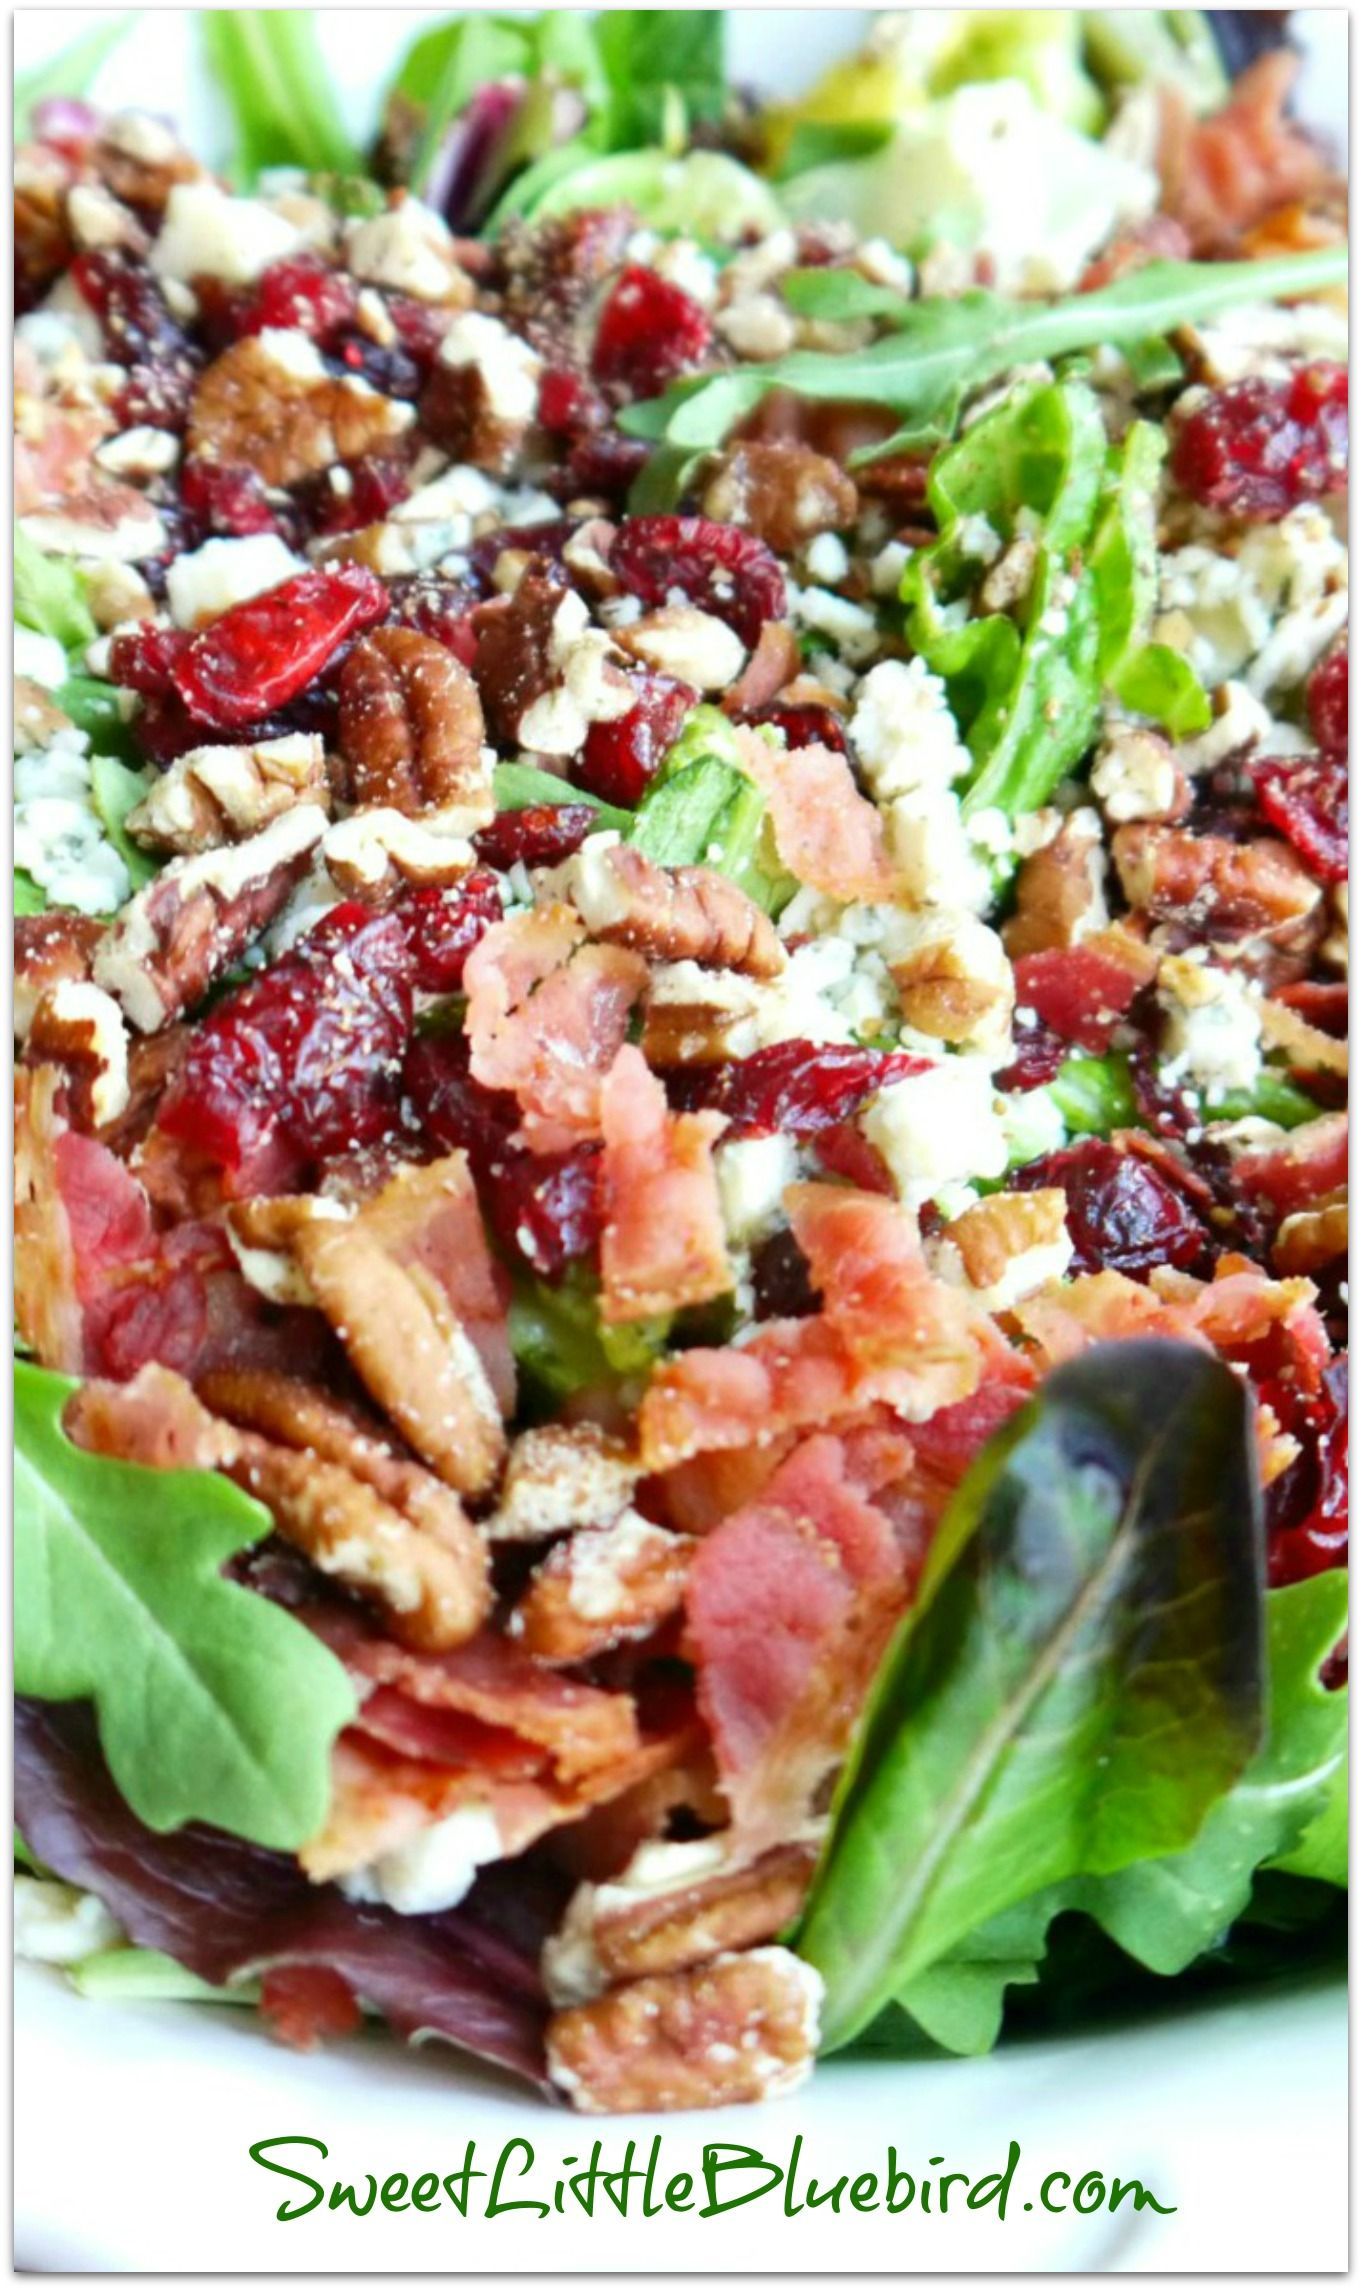 MY #1 MOST REQUESTED SALAD {Made with Gorgonzola, Apple, Dried Cherries, Toasted Pecans and Bacon topped with a Sweet Balsamic